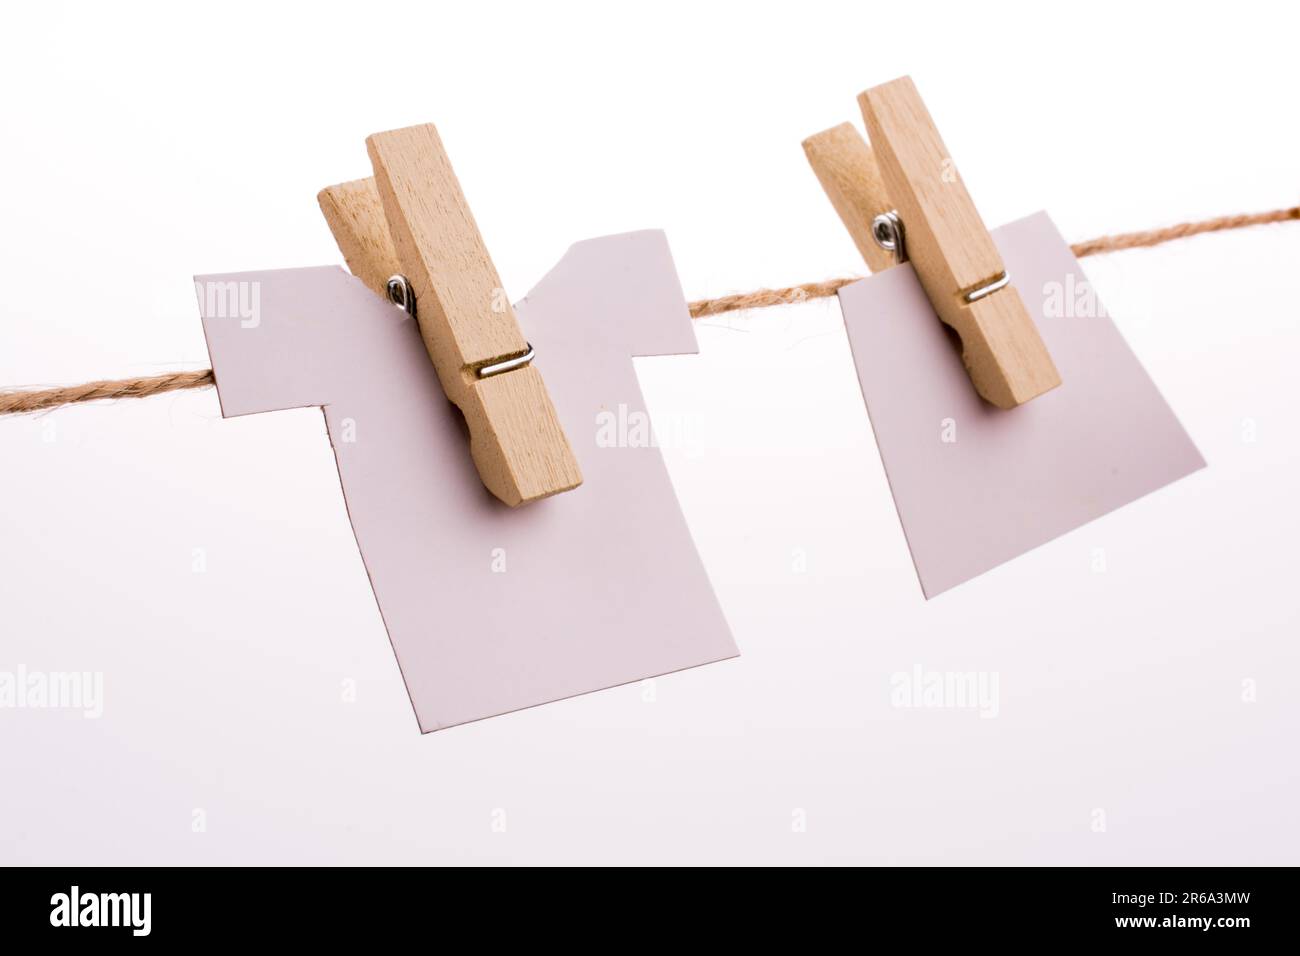 Clothespins holding clothes Stock Photo